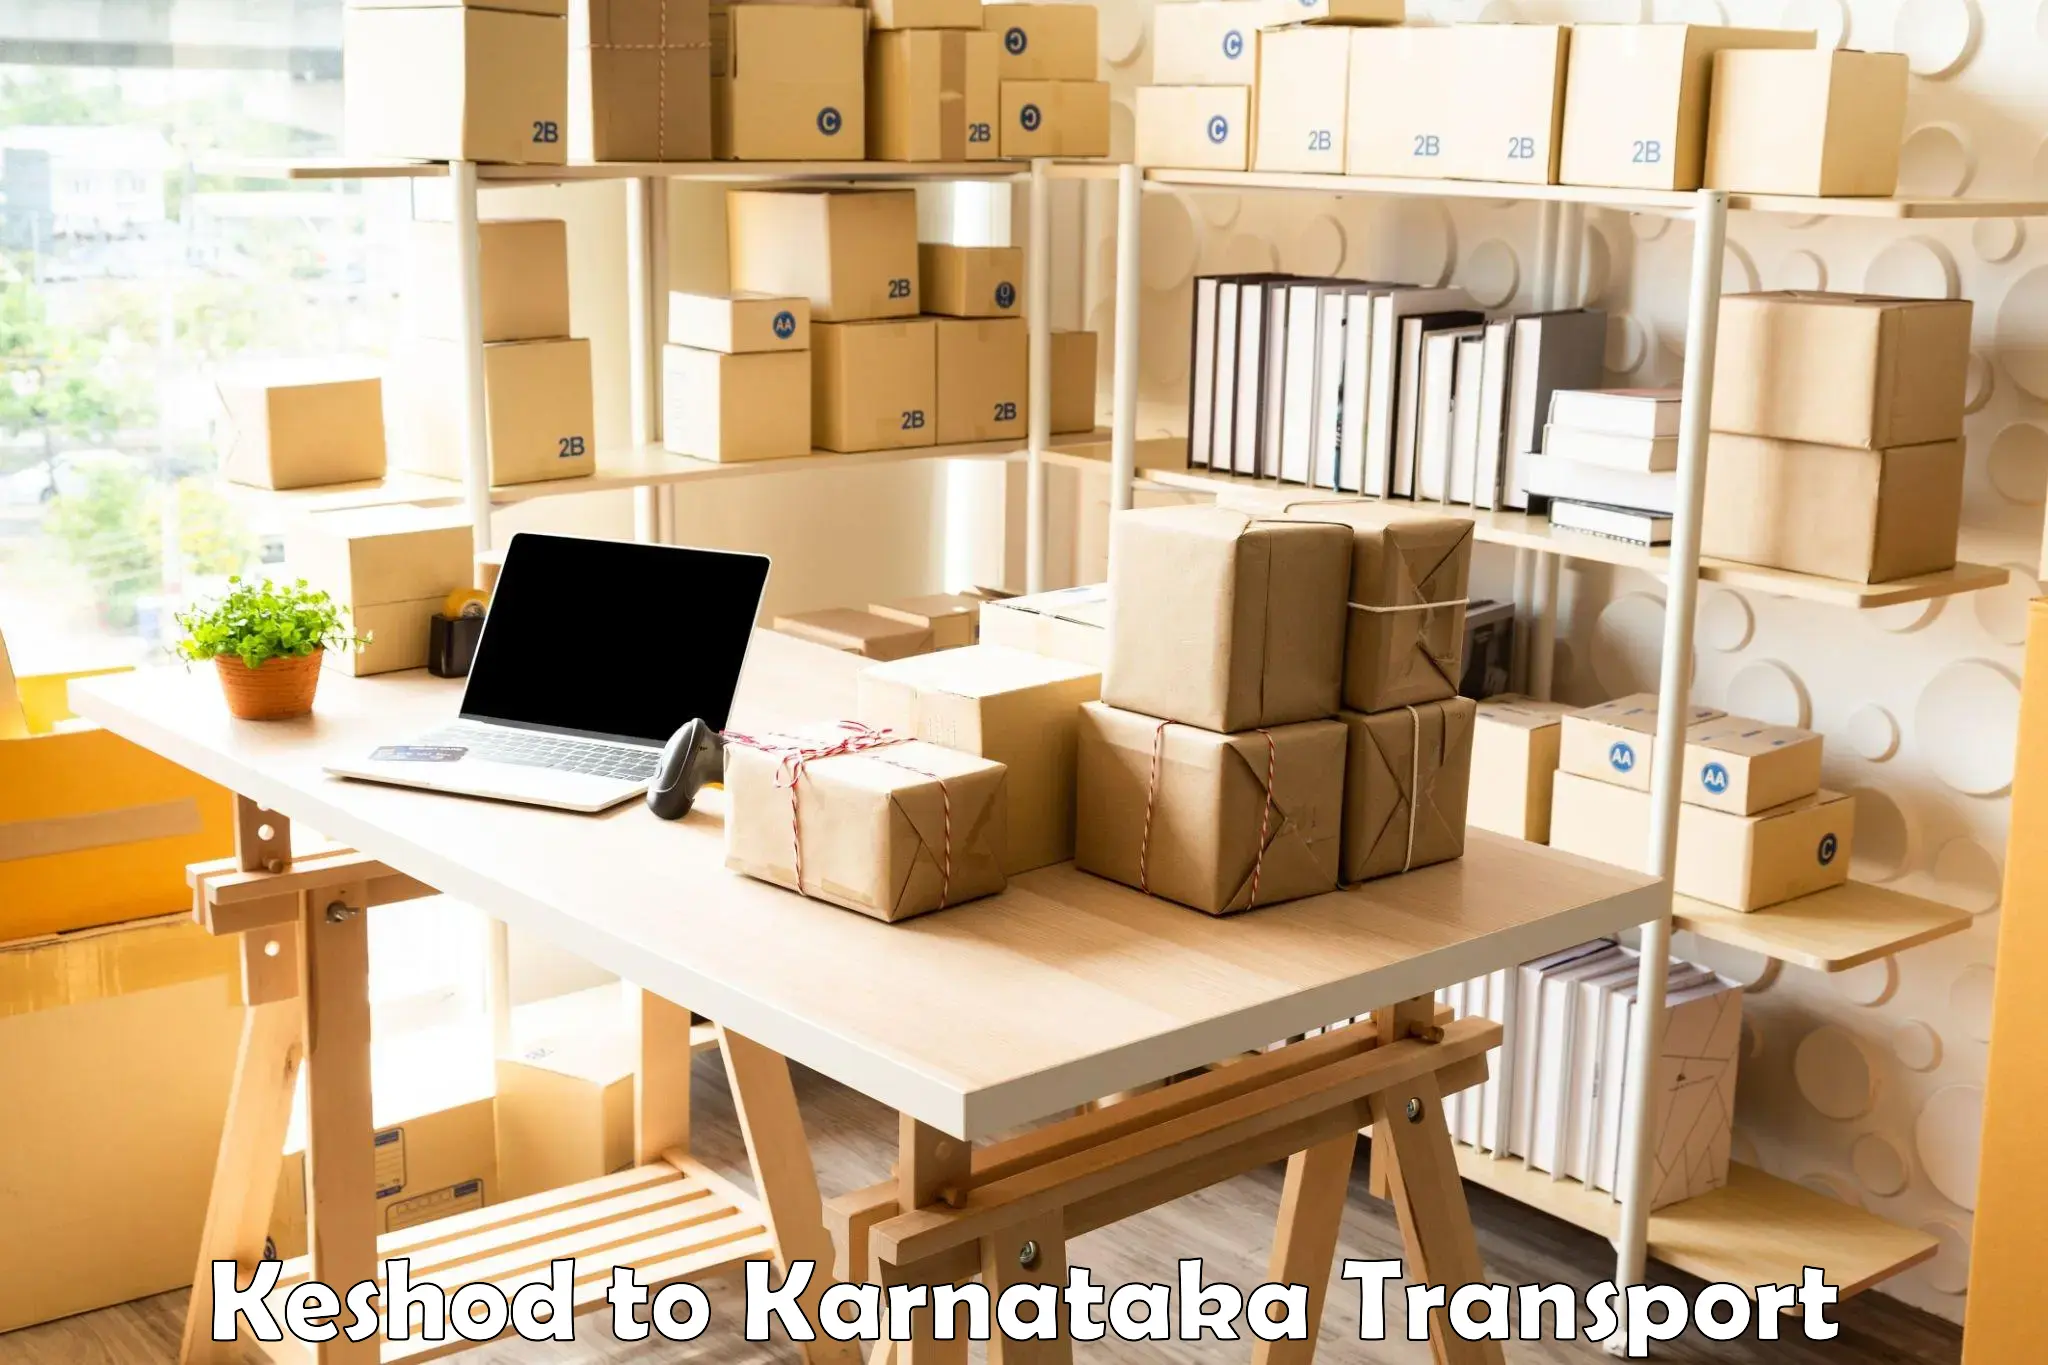 Nearby transport service Keshod to Dharwad